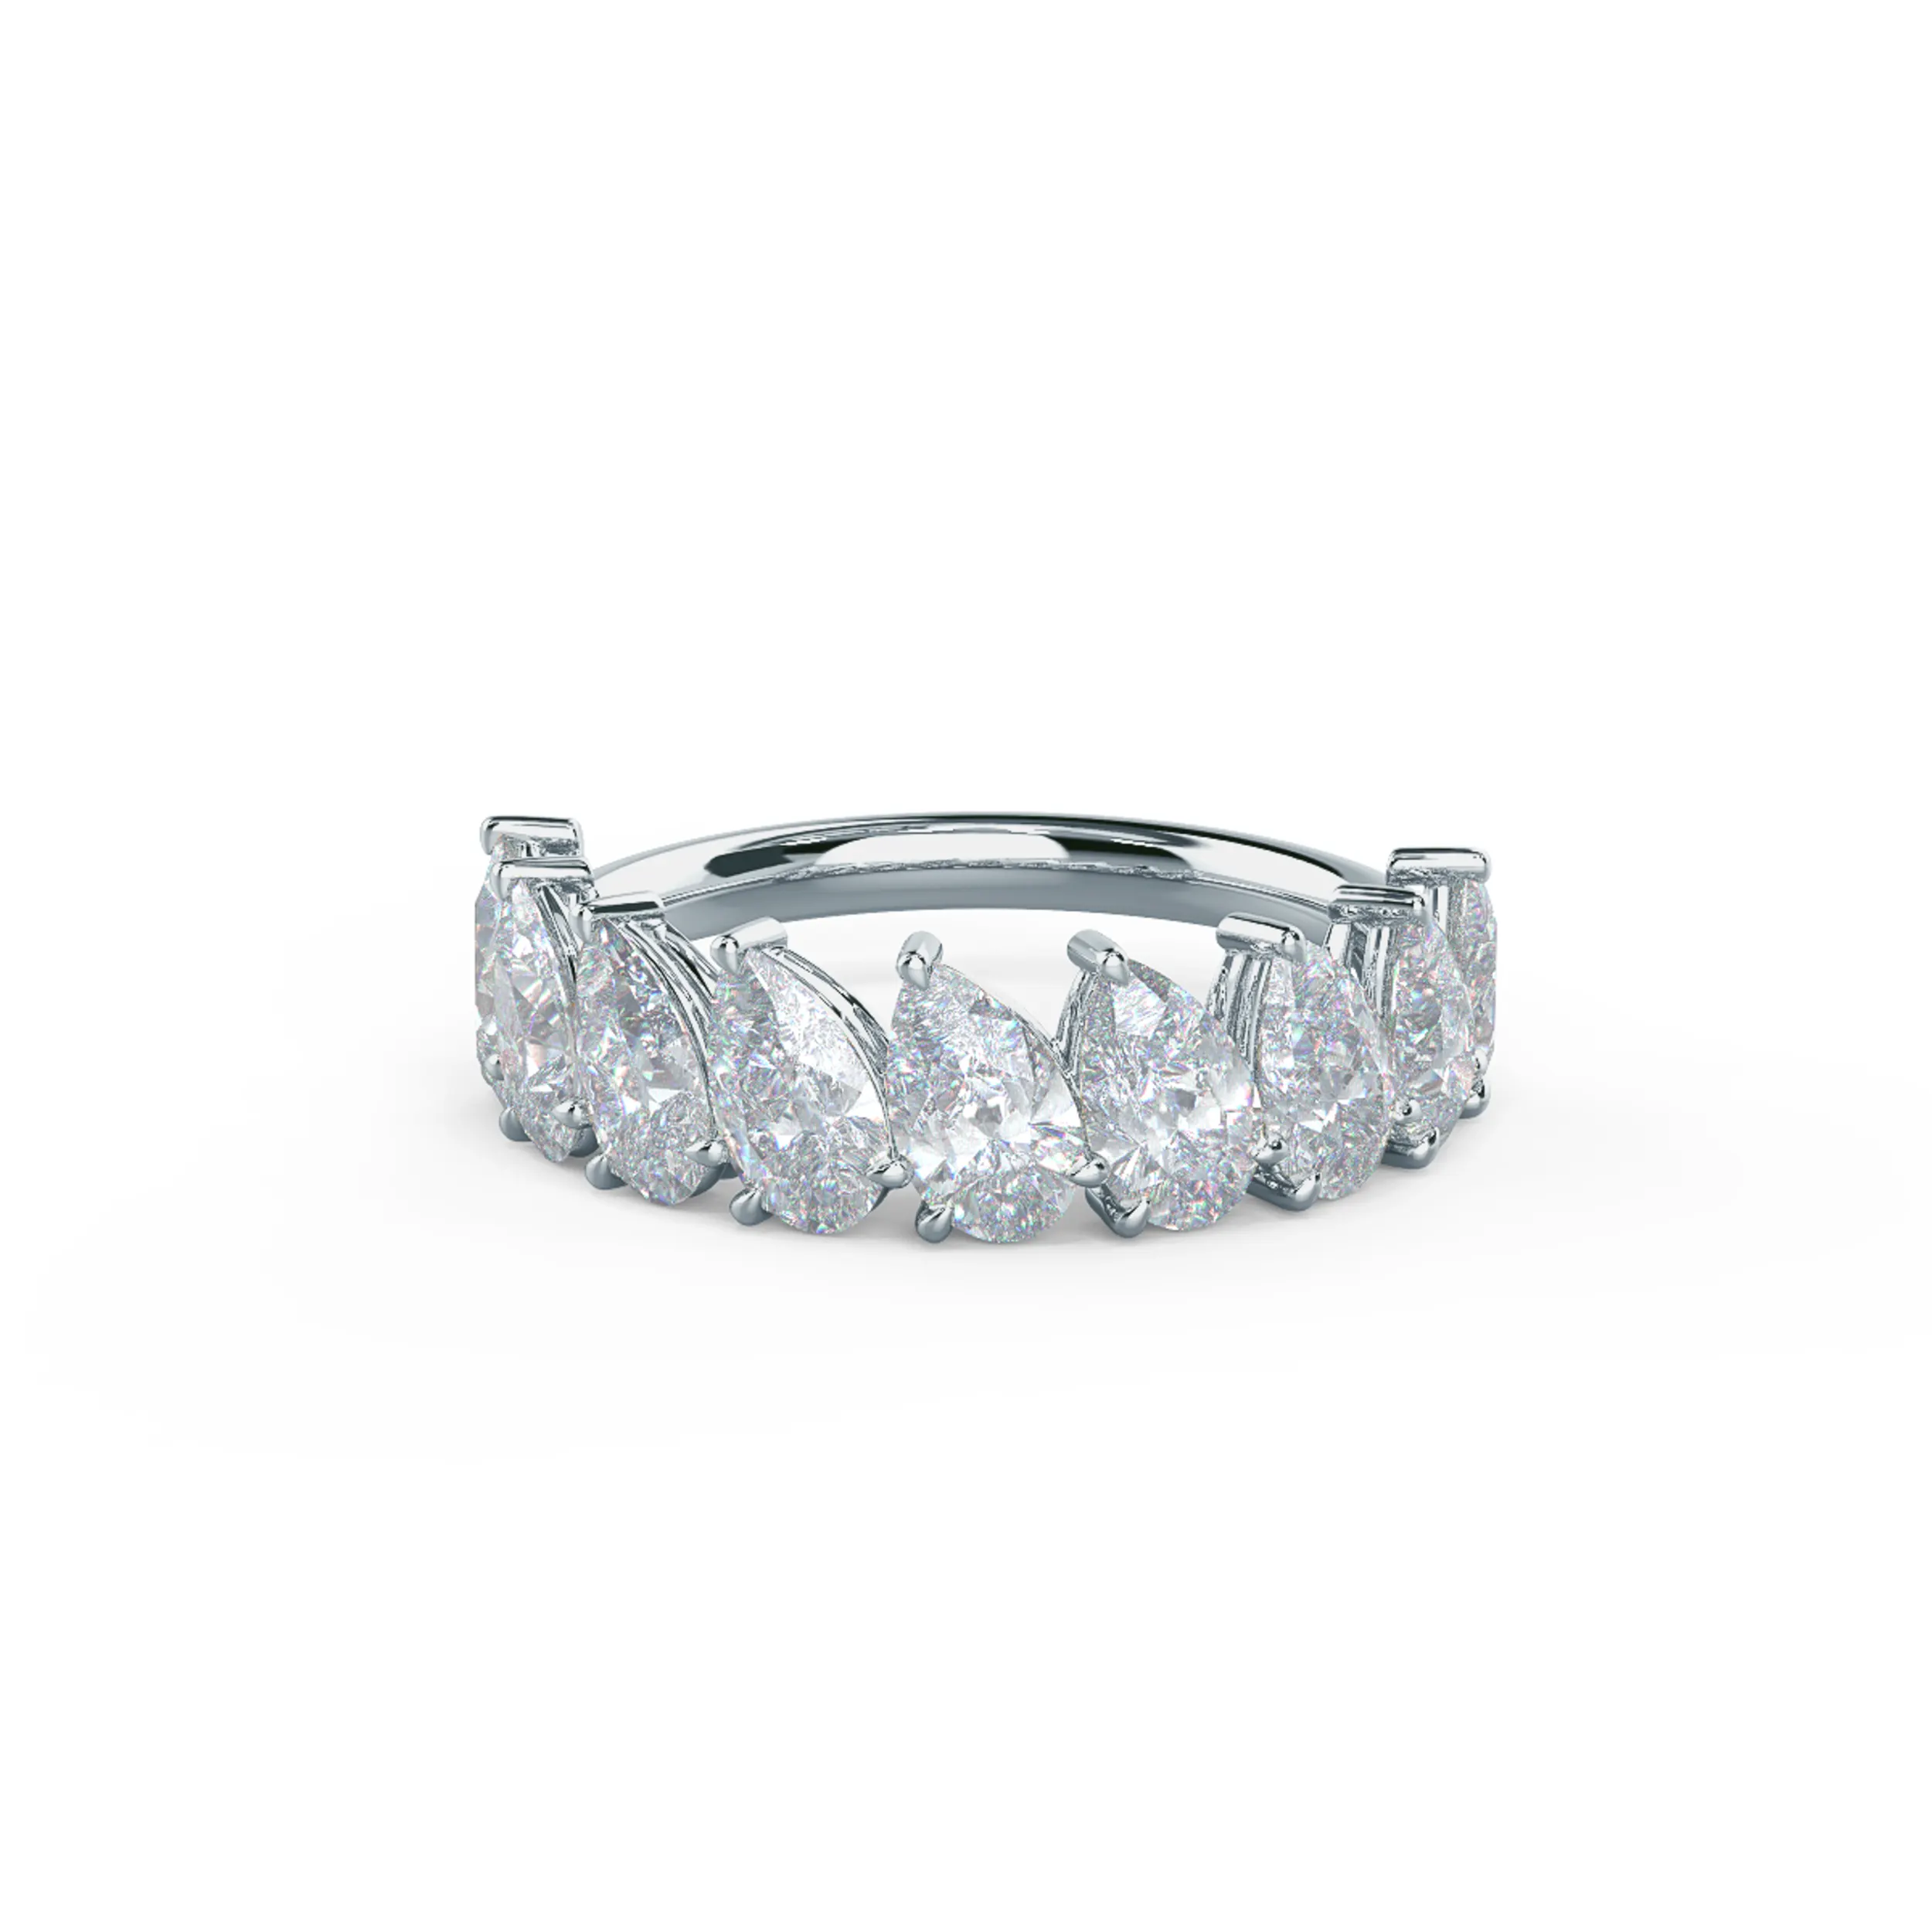 2.5 Carat Lab Diamonds set in White Gold Pear Angled Half Band (Main View)